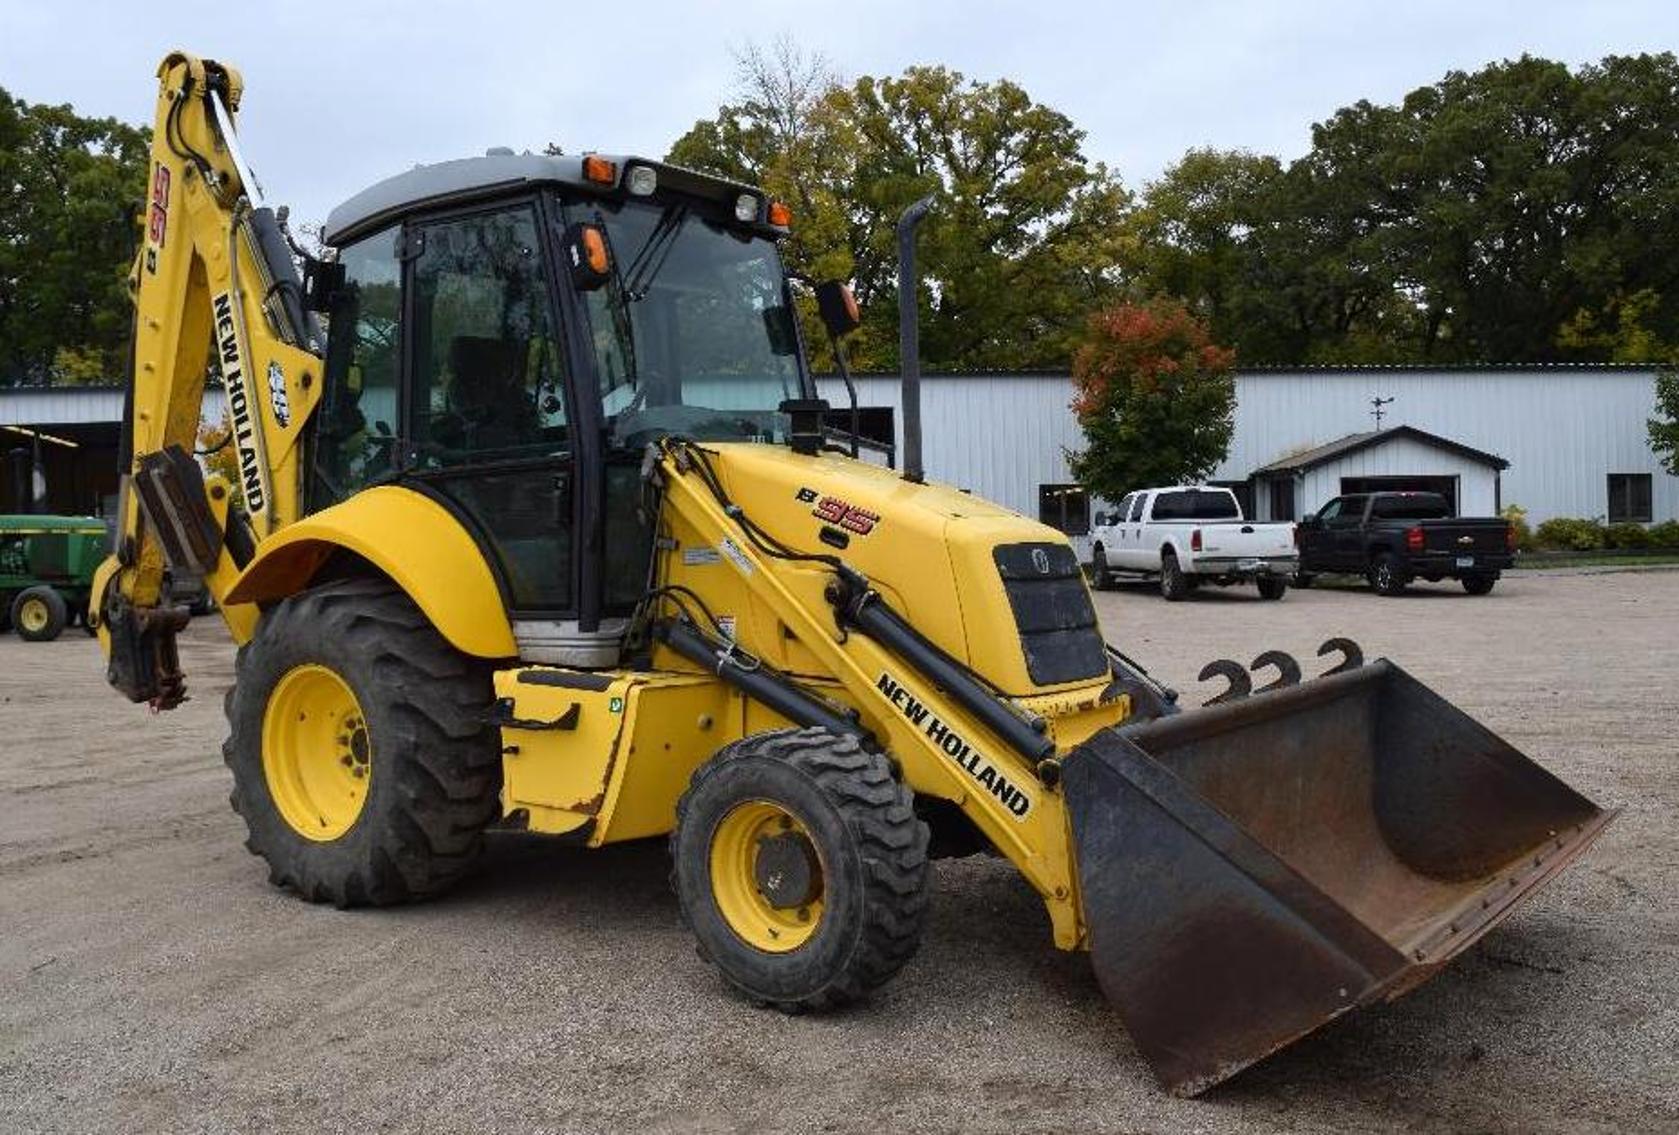 Farm and Home Fall Inventory Reduction: Semis, Construction Equipment, Trailers